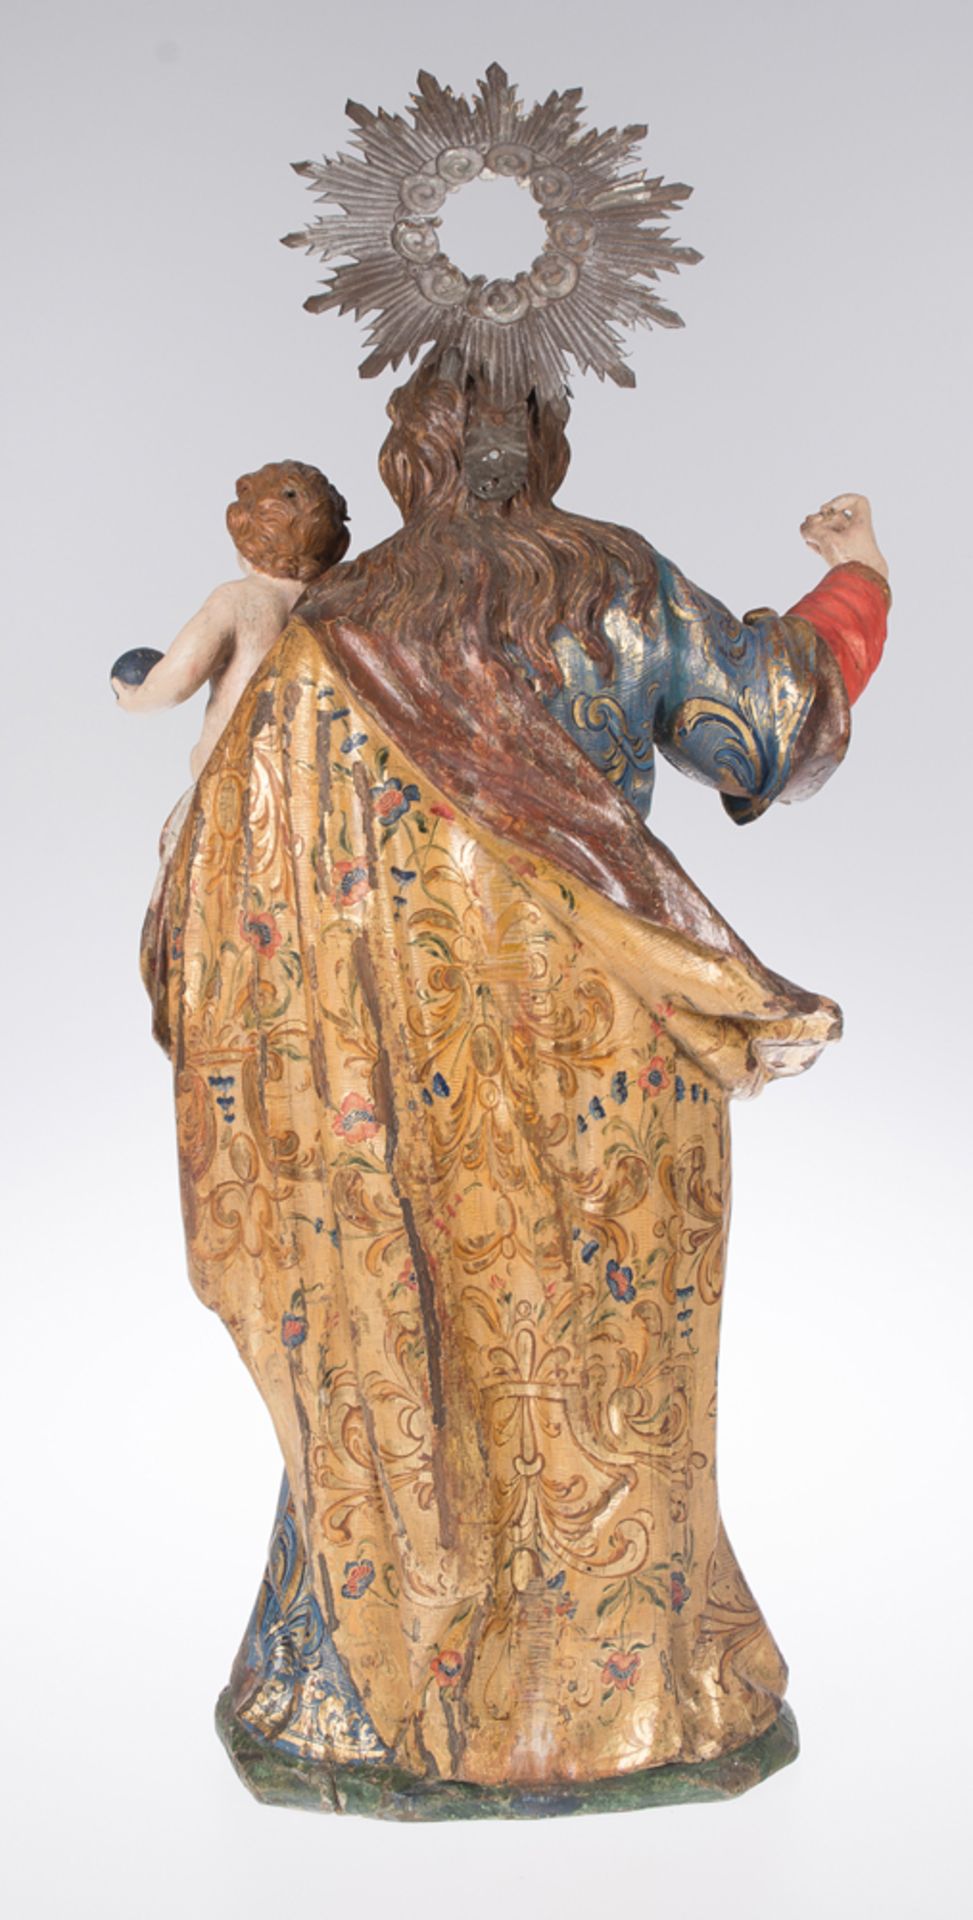 "Saint Joseph with the Christ Child". Carved, gilded and polychromed wooden sculpture. Spanish Scho - Image 5 of 6